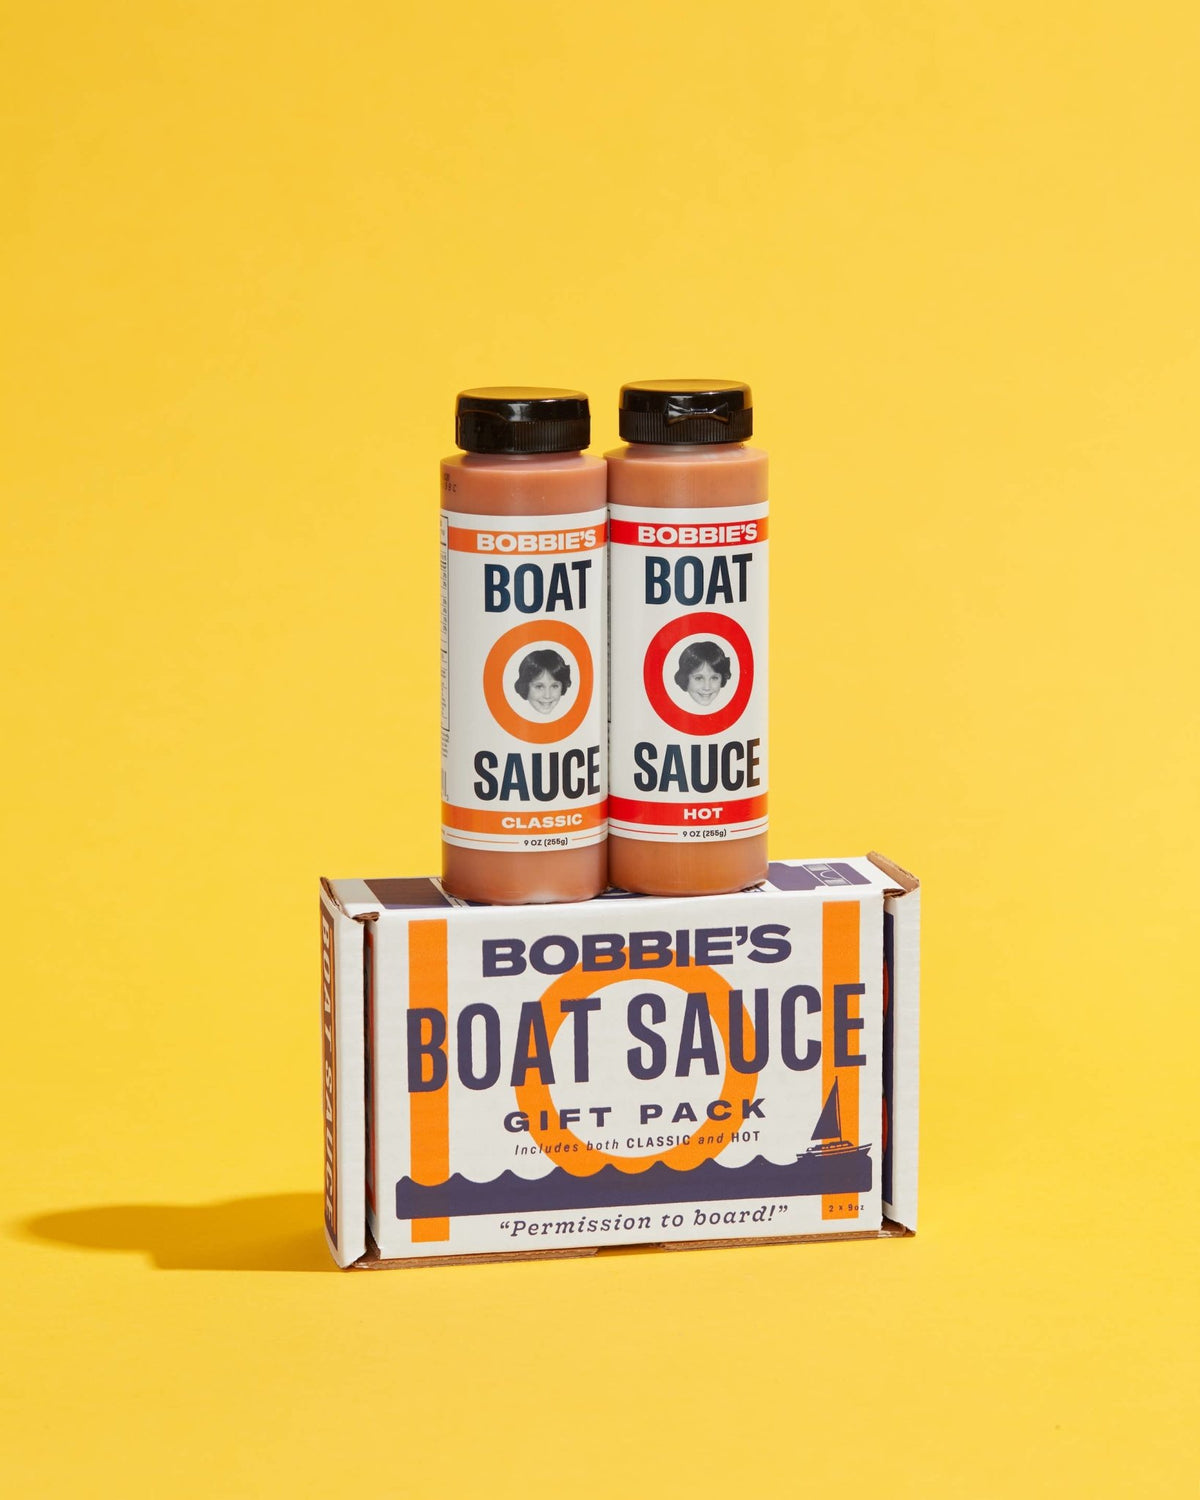 Bobbie's Boat Sauce - The Bobbie's Boat Sauce Gift Pack - Pacific Flyway Supplies